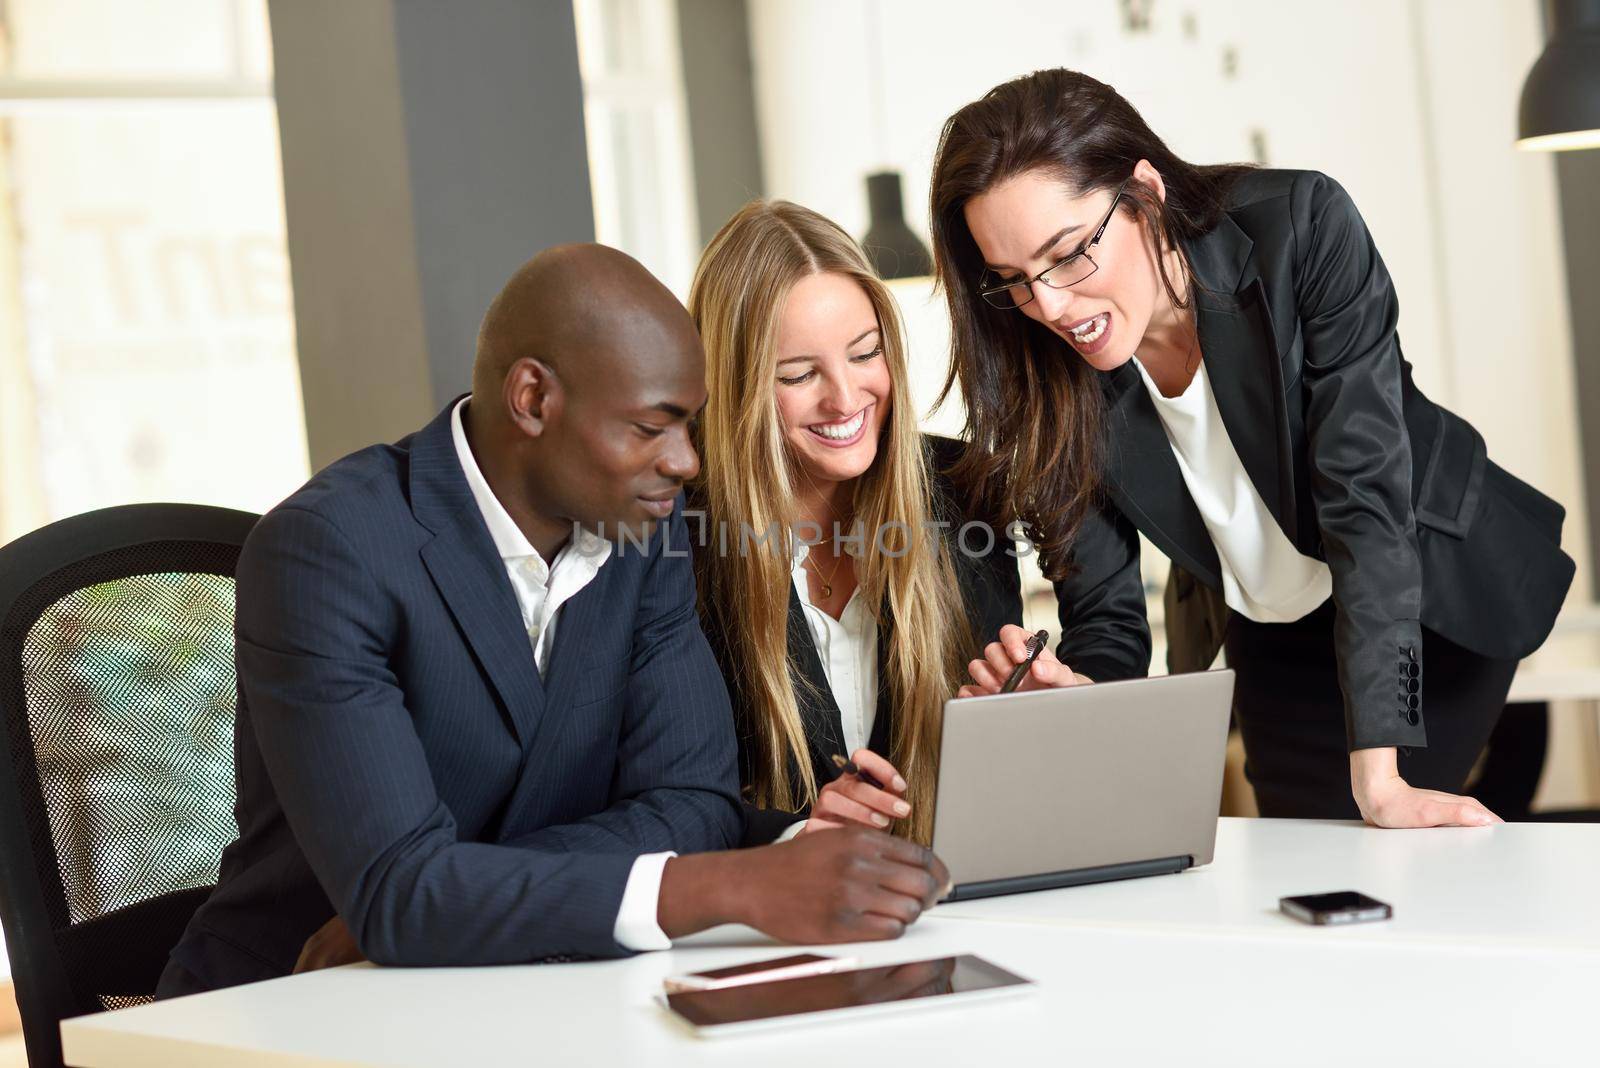 Multi-ethnic group of three businesspeople meeting in a modern office. Two caucasian women and a black man wearing suit looking at a laptop computer.